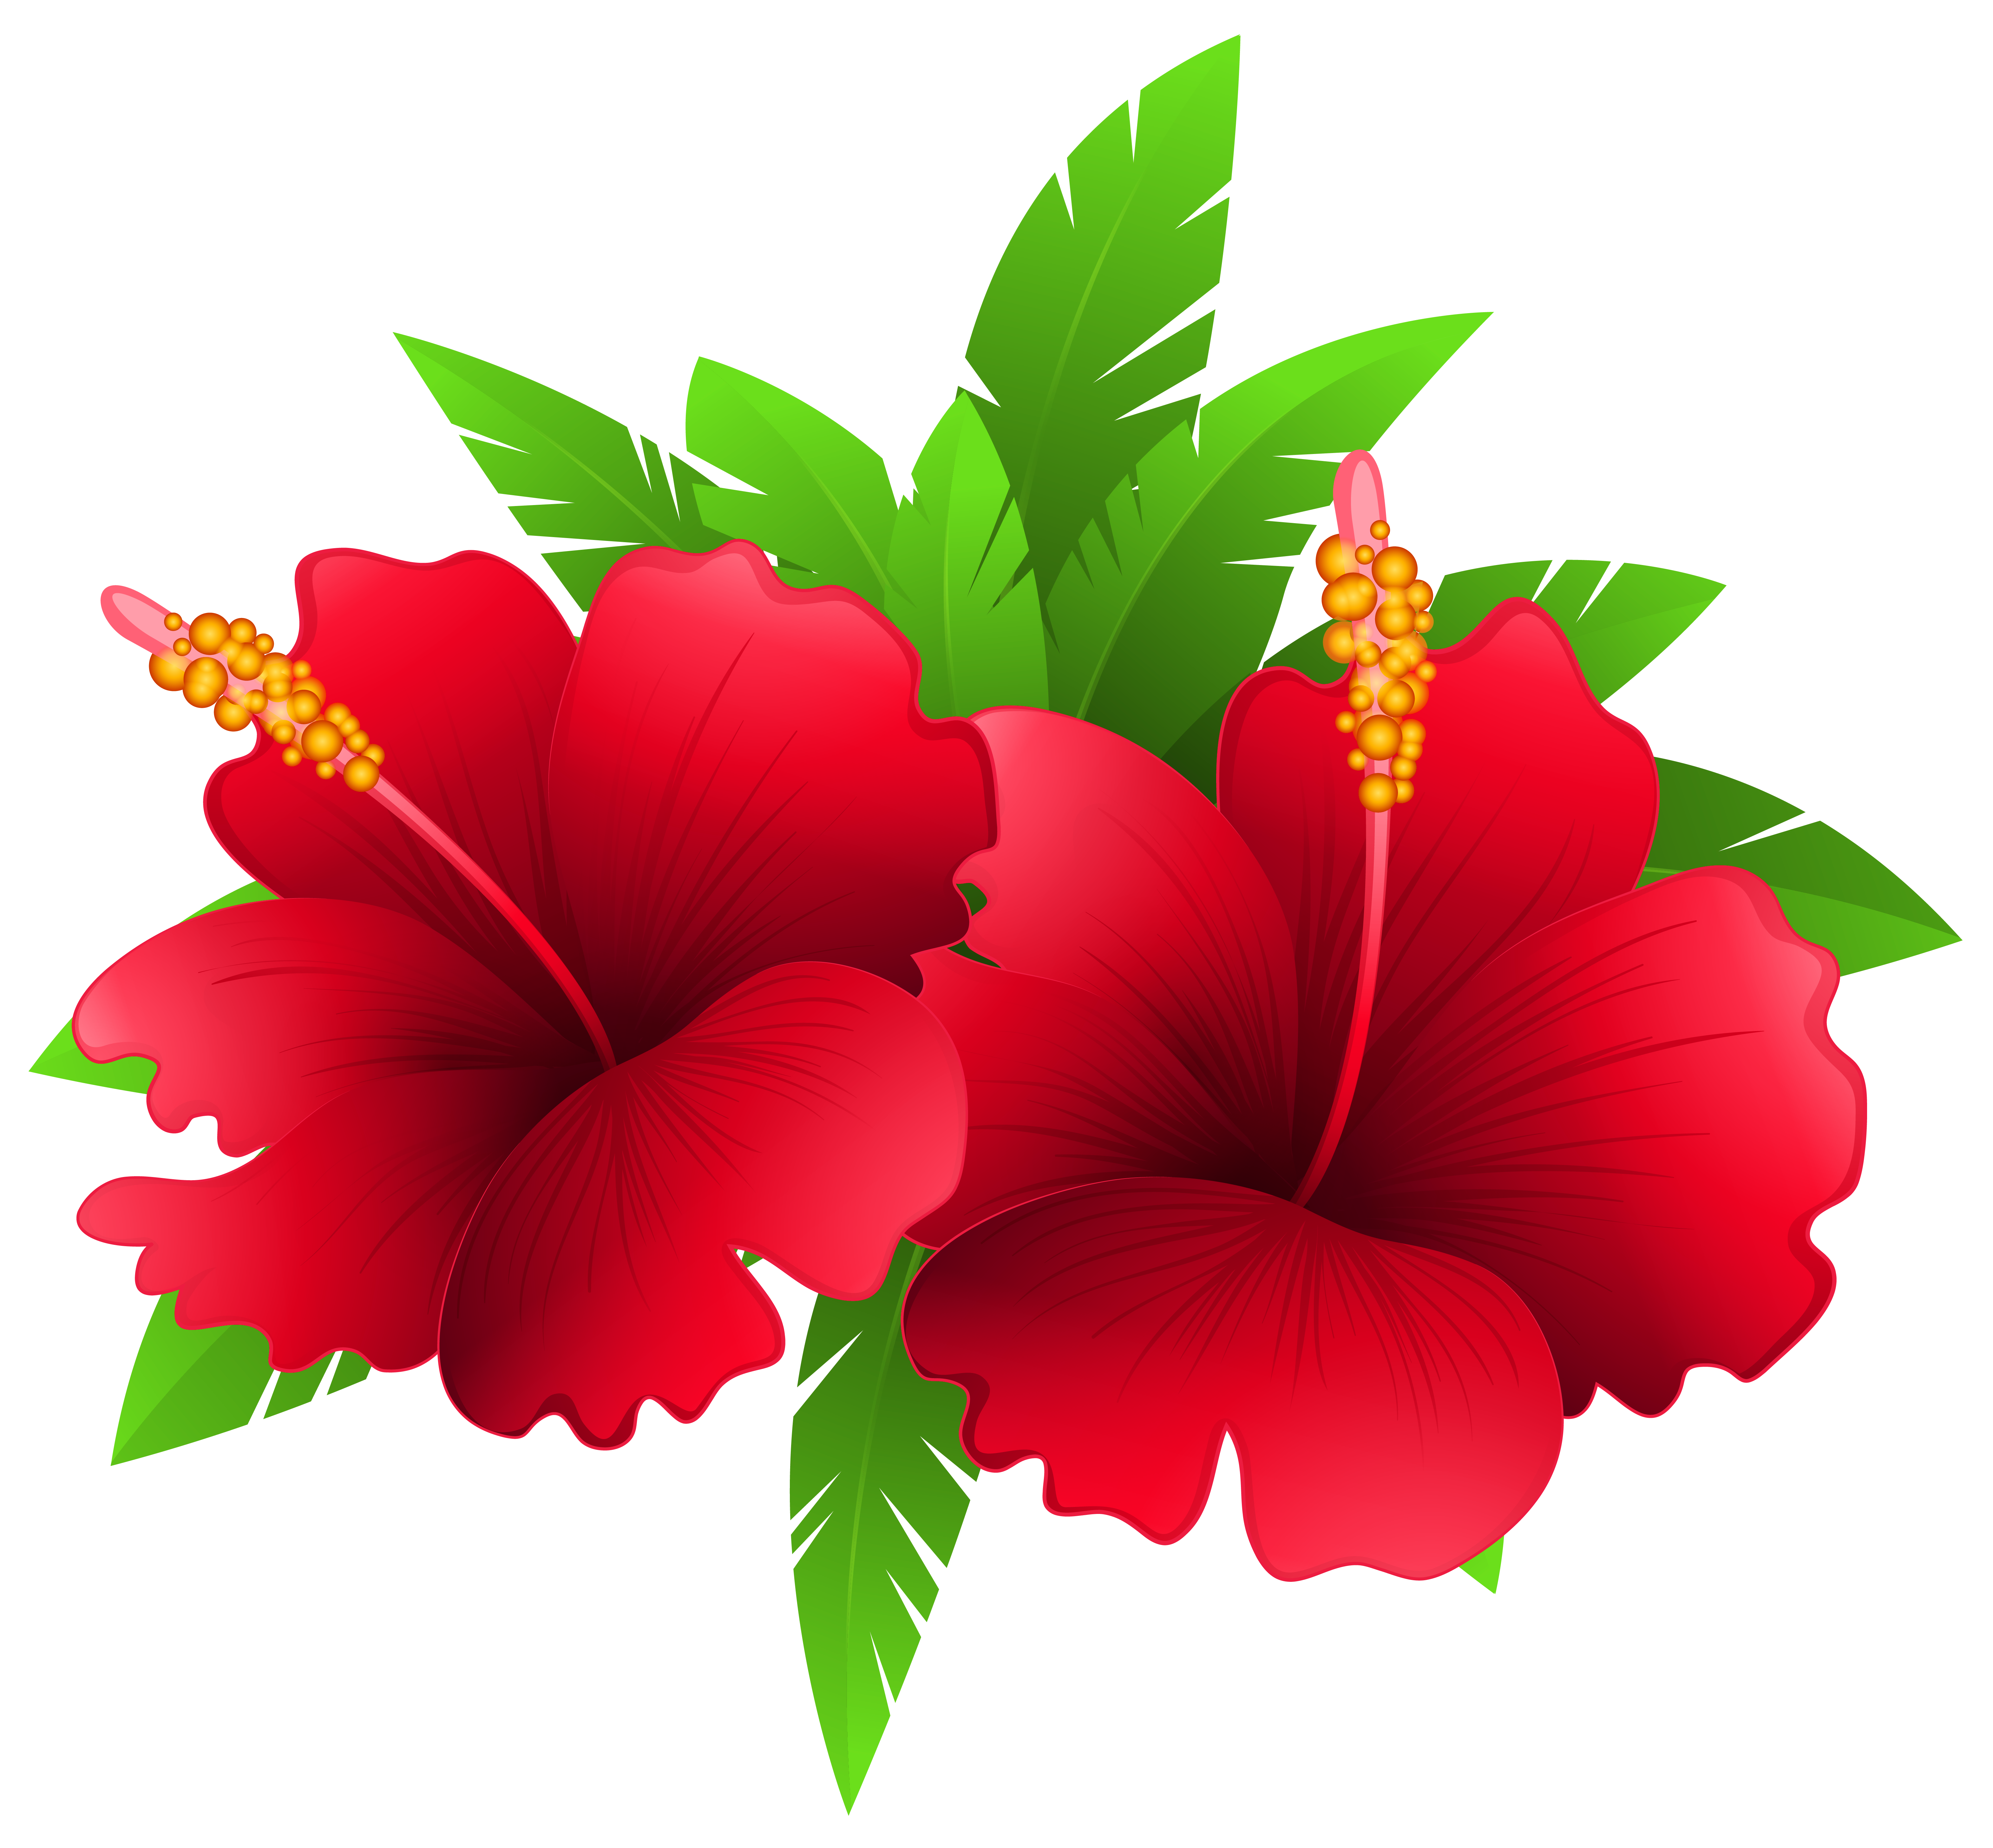 Exotic Flowers and Plant PNG Clipart Image.